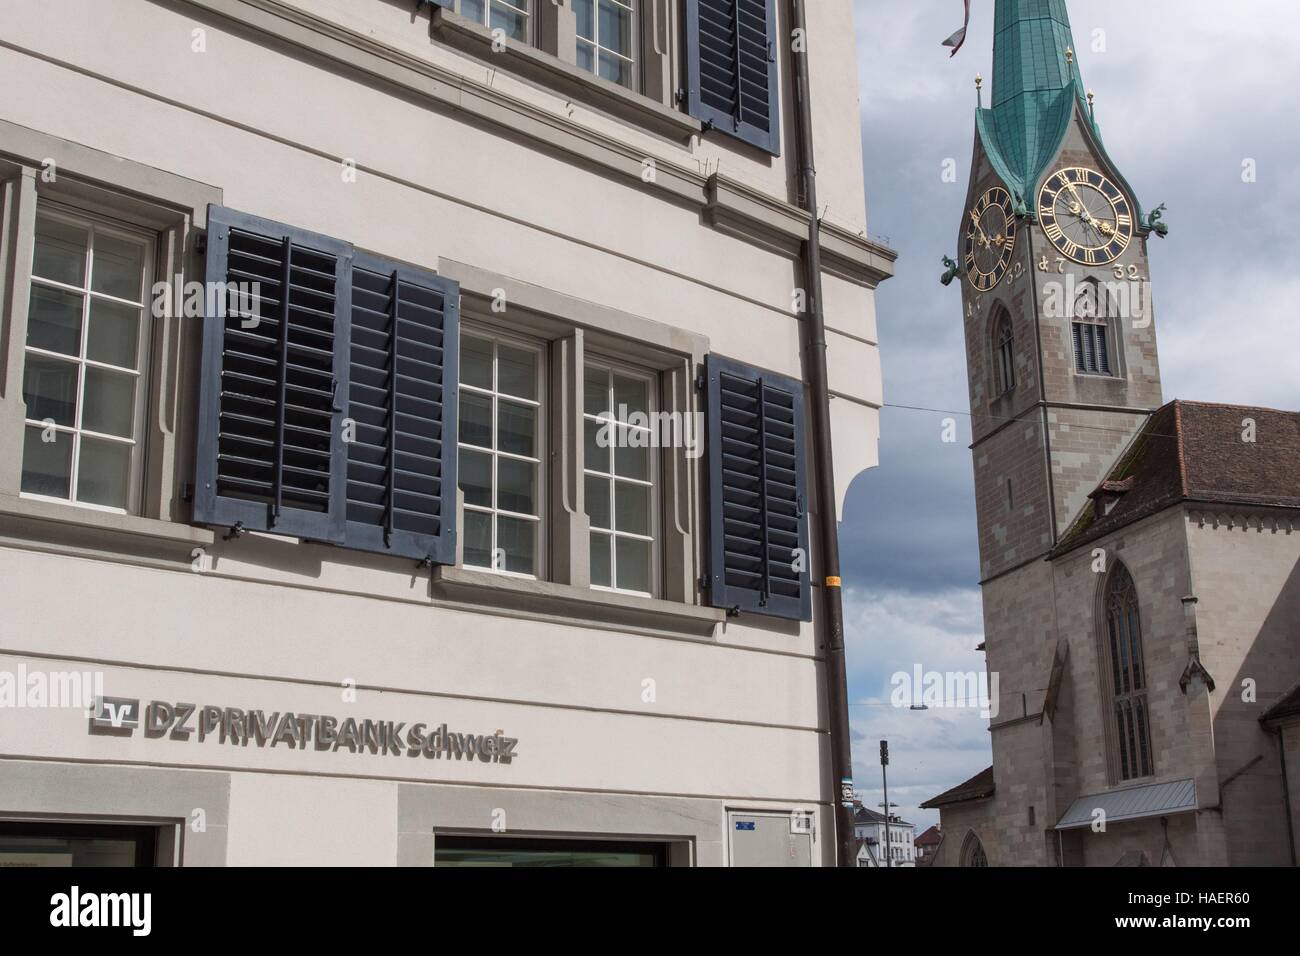 FACADE OF THE HEADQUARTERS OF A PRIVATE SWISS BANK WITH THE FRAUMUNSTER CHURCH IN THE BACKGROUND, TAX HAVEN, TAX EVASION, CITY OF ZURICH, CANTON OF ZURICH, SWITZERLAND Stock Photo